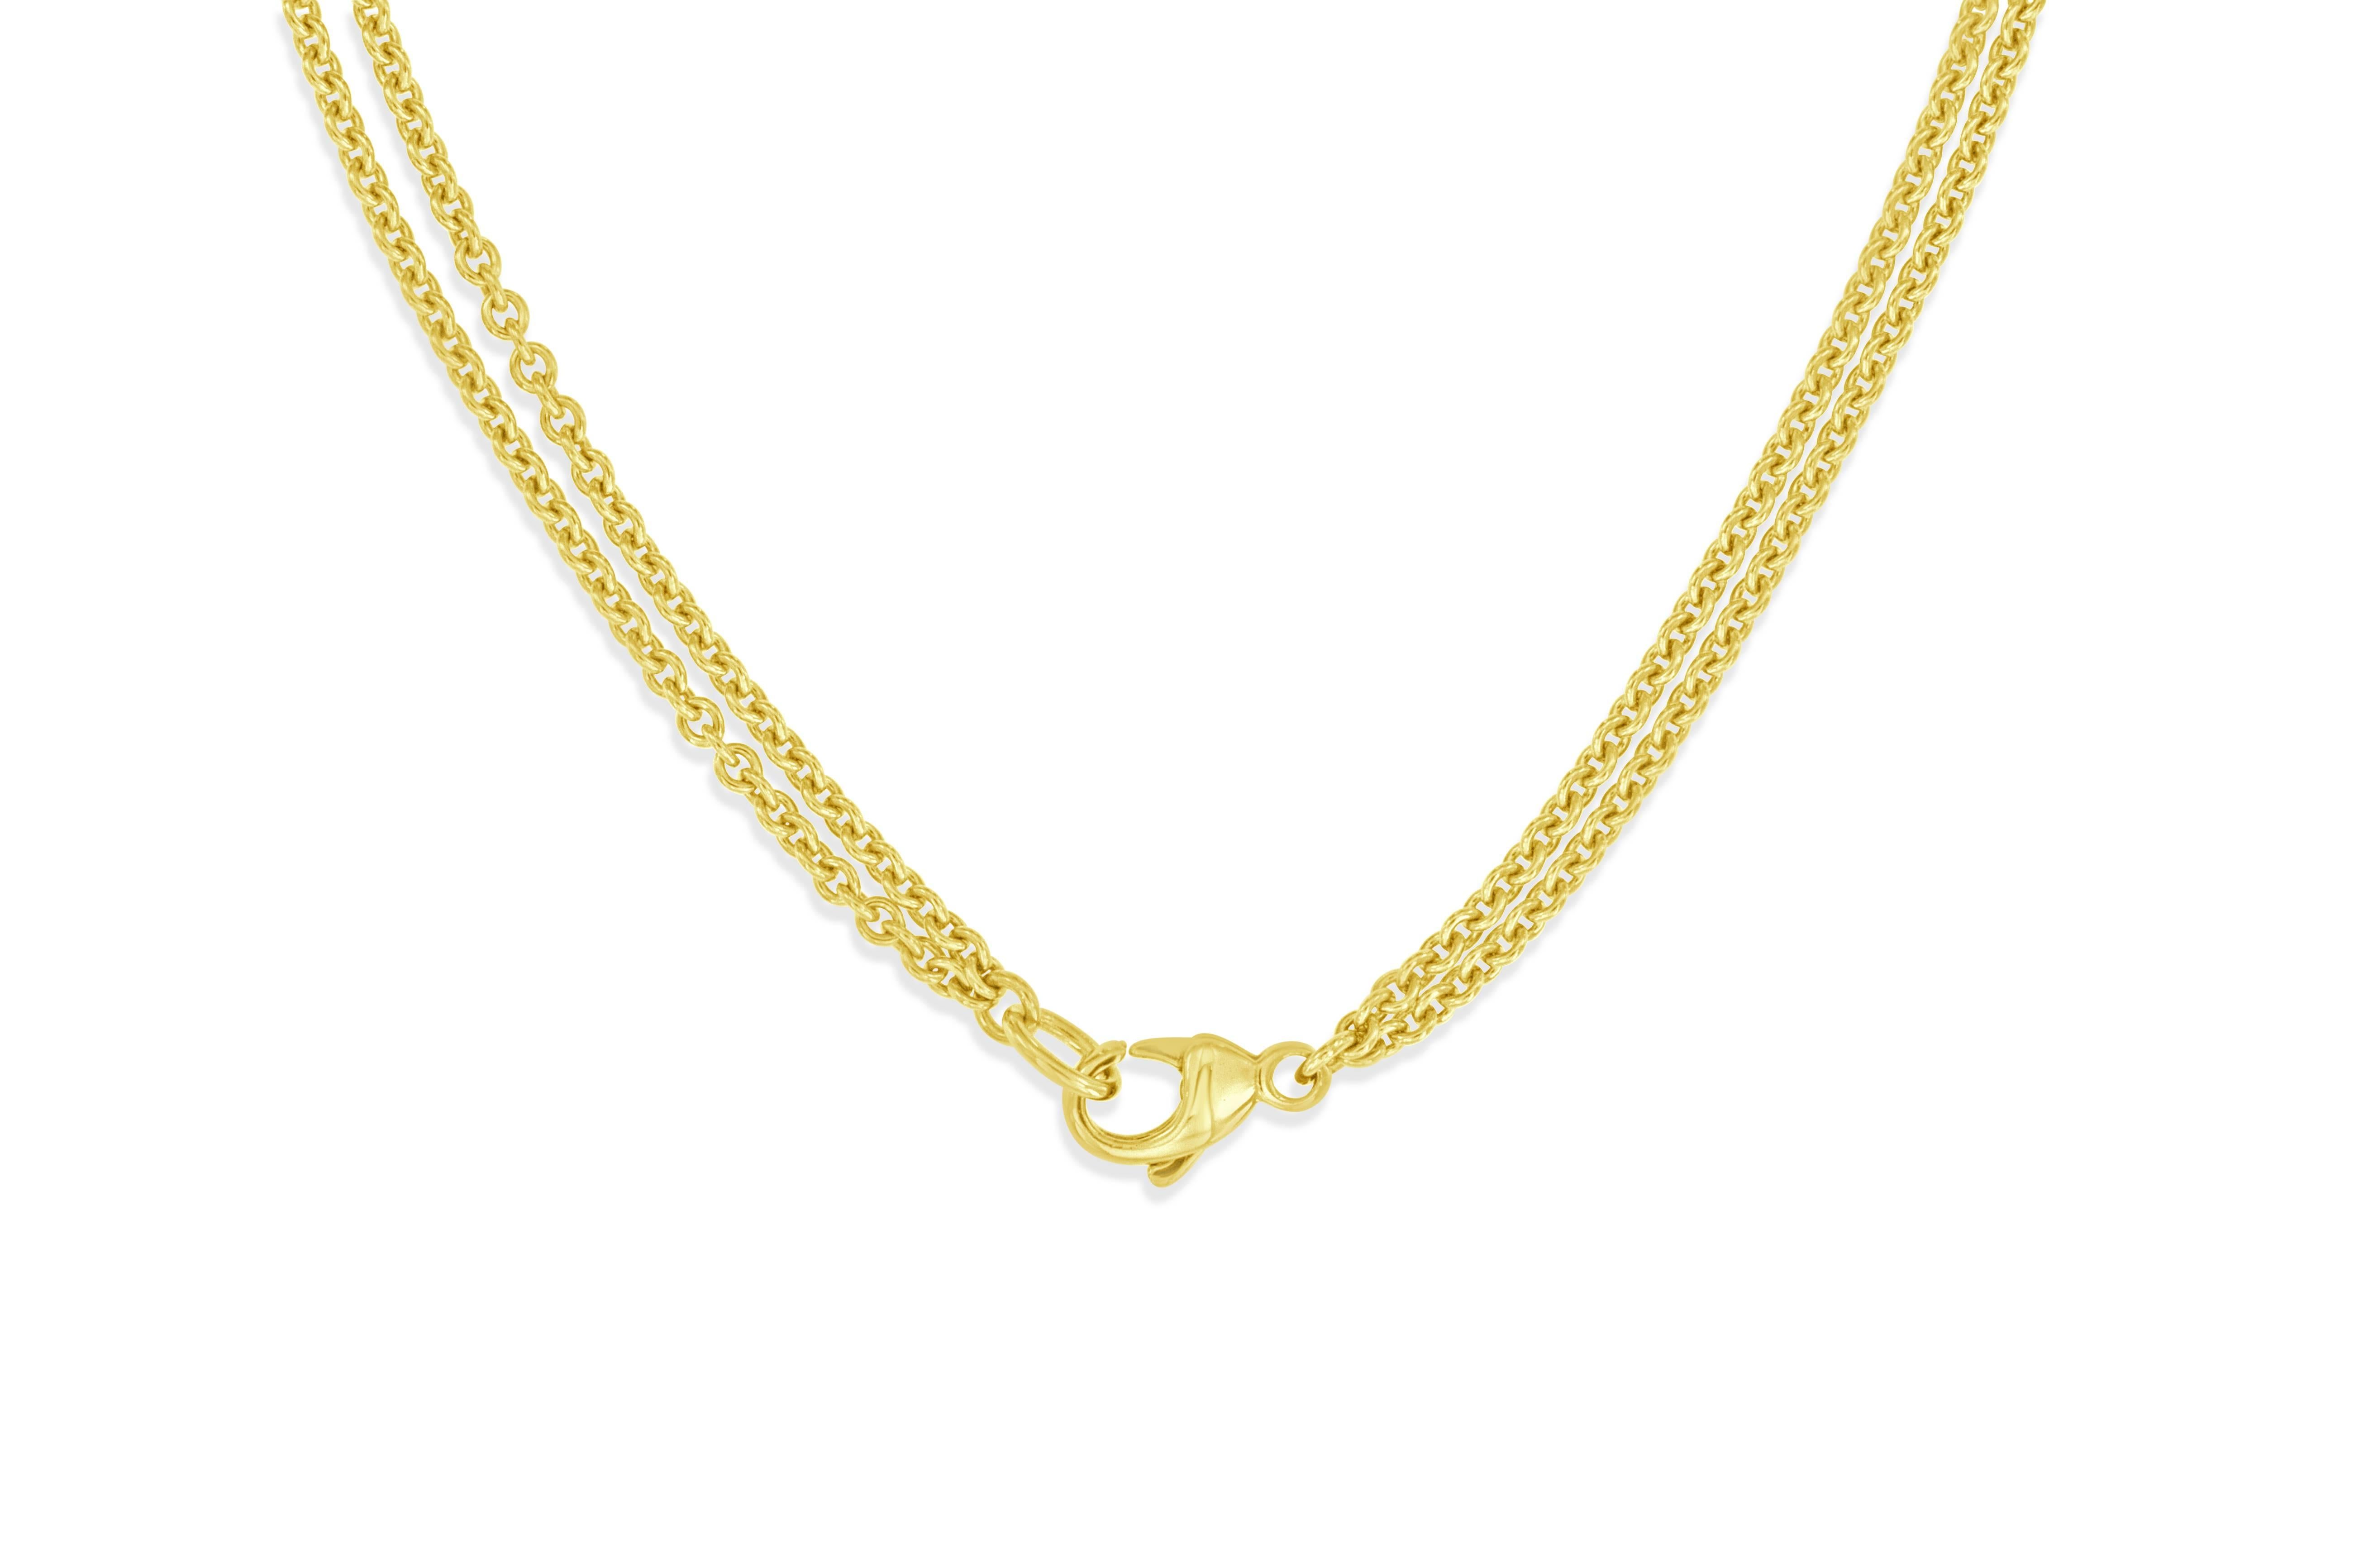 0.34 Carat Round Brilliant Cut Diamond Yellow Gold Necklace In Excellent Condition For Sale In Grosse Pointe Woods, MI